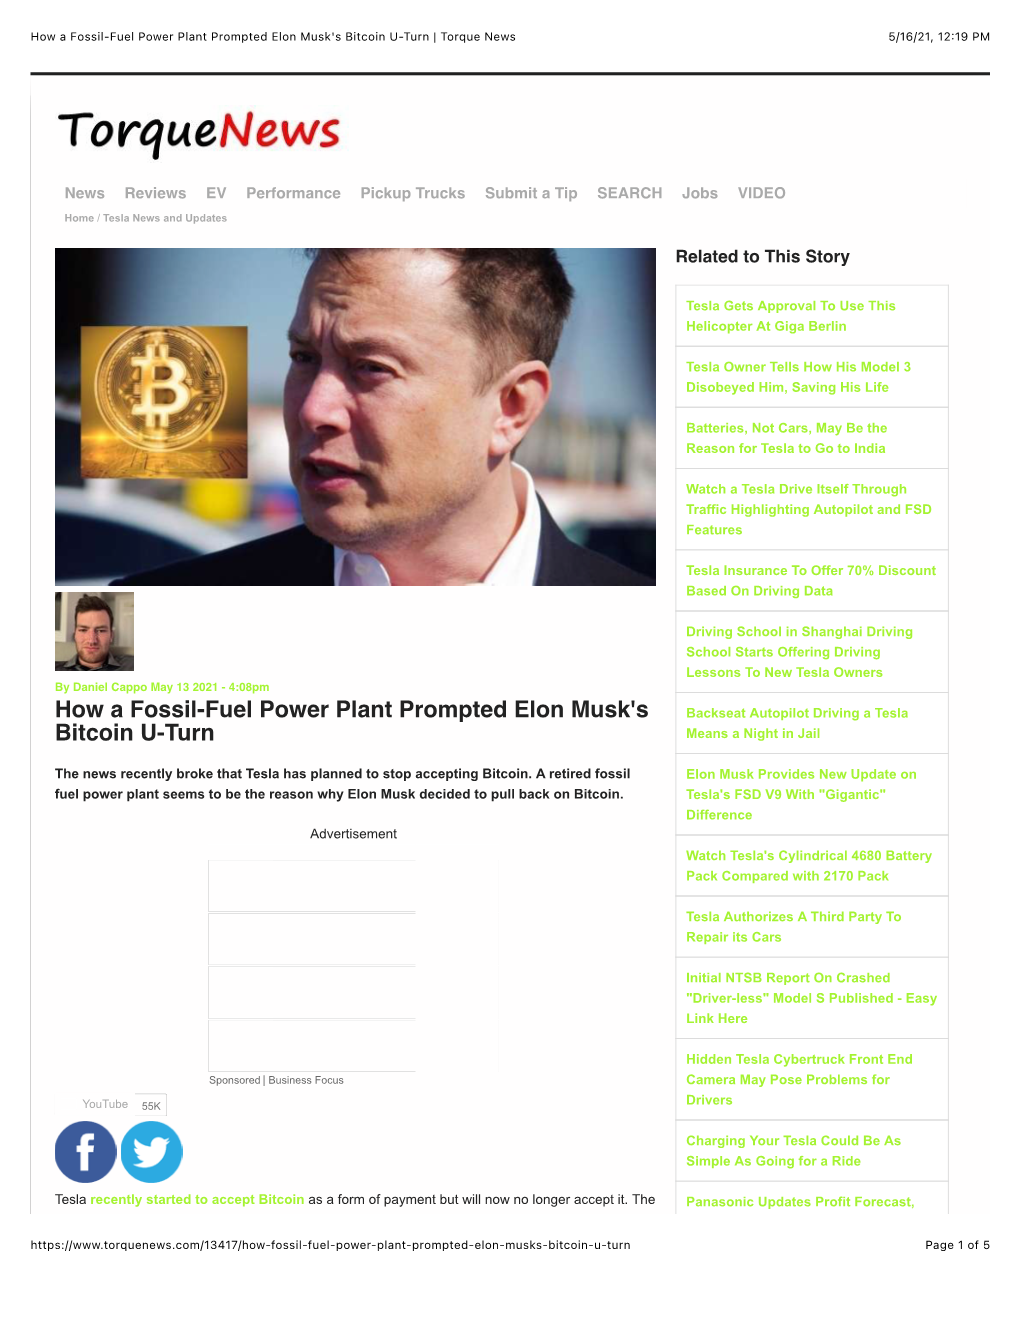 How a Fossil-Fuel Power Plant Prompted Elon Musk's Bitcoin U-Turn | Torque News 5/16/21, 12:19 PM